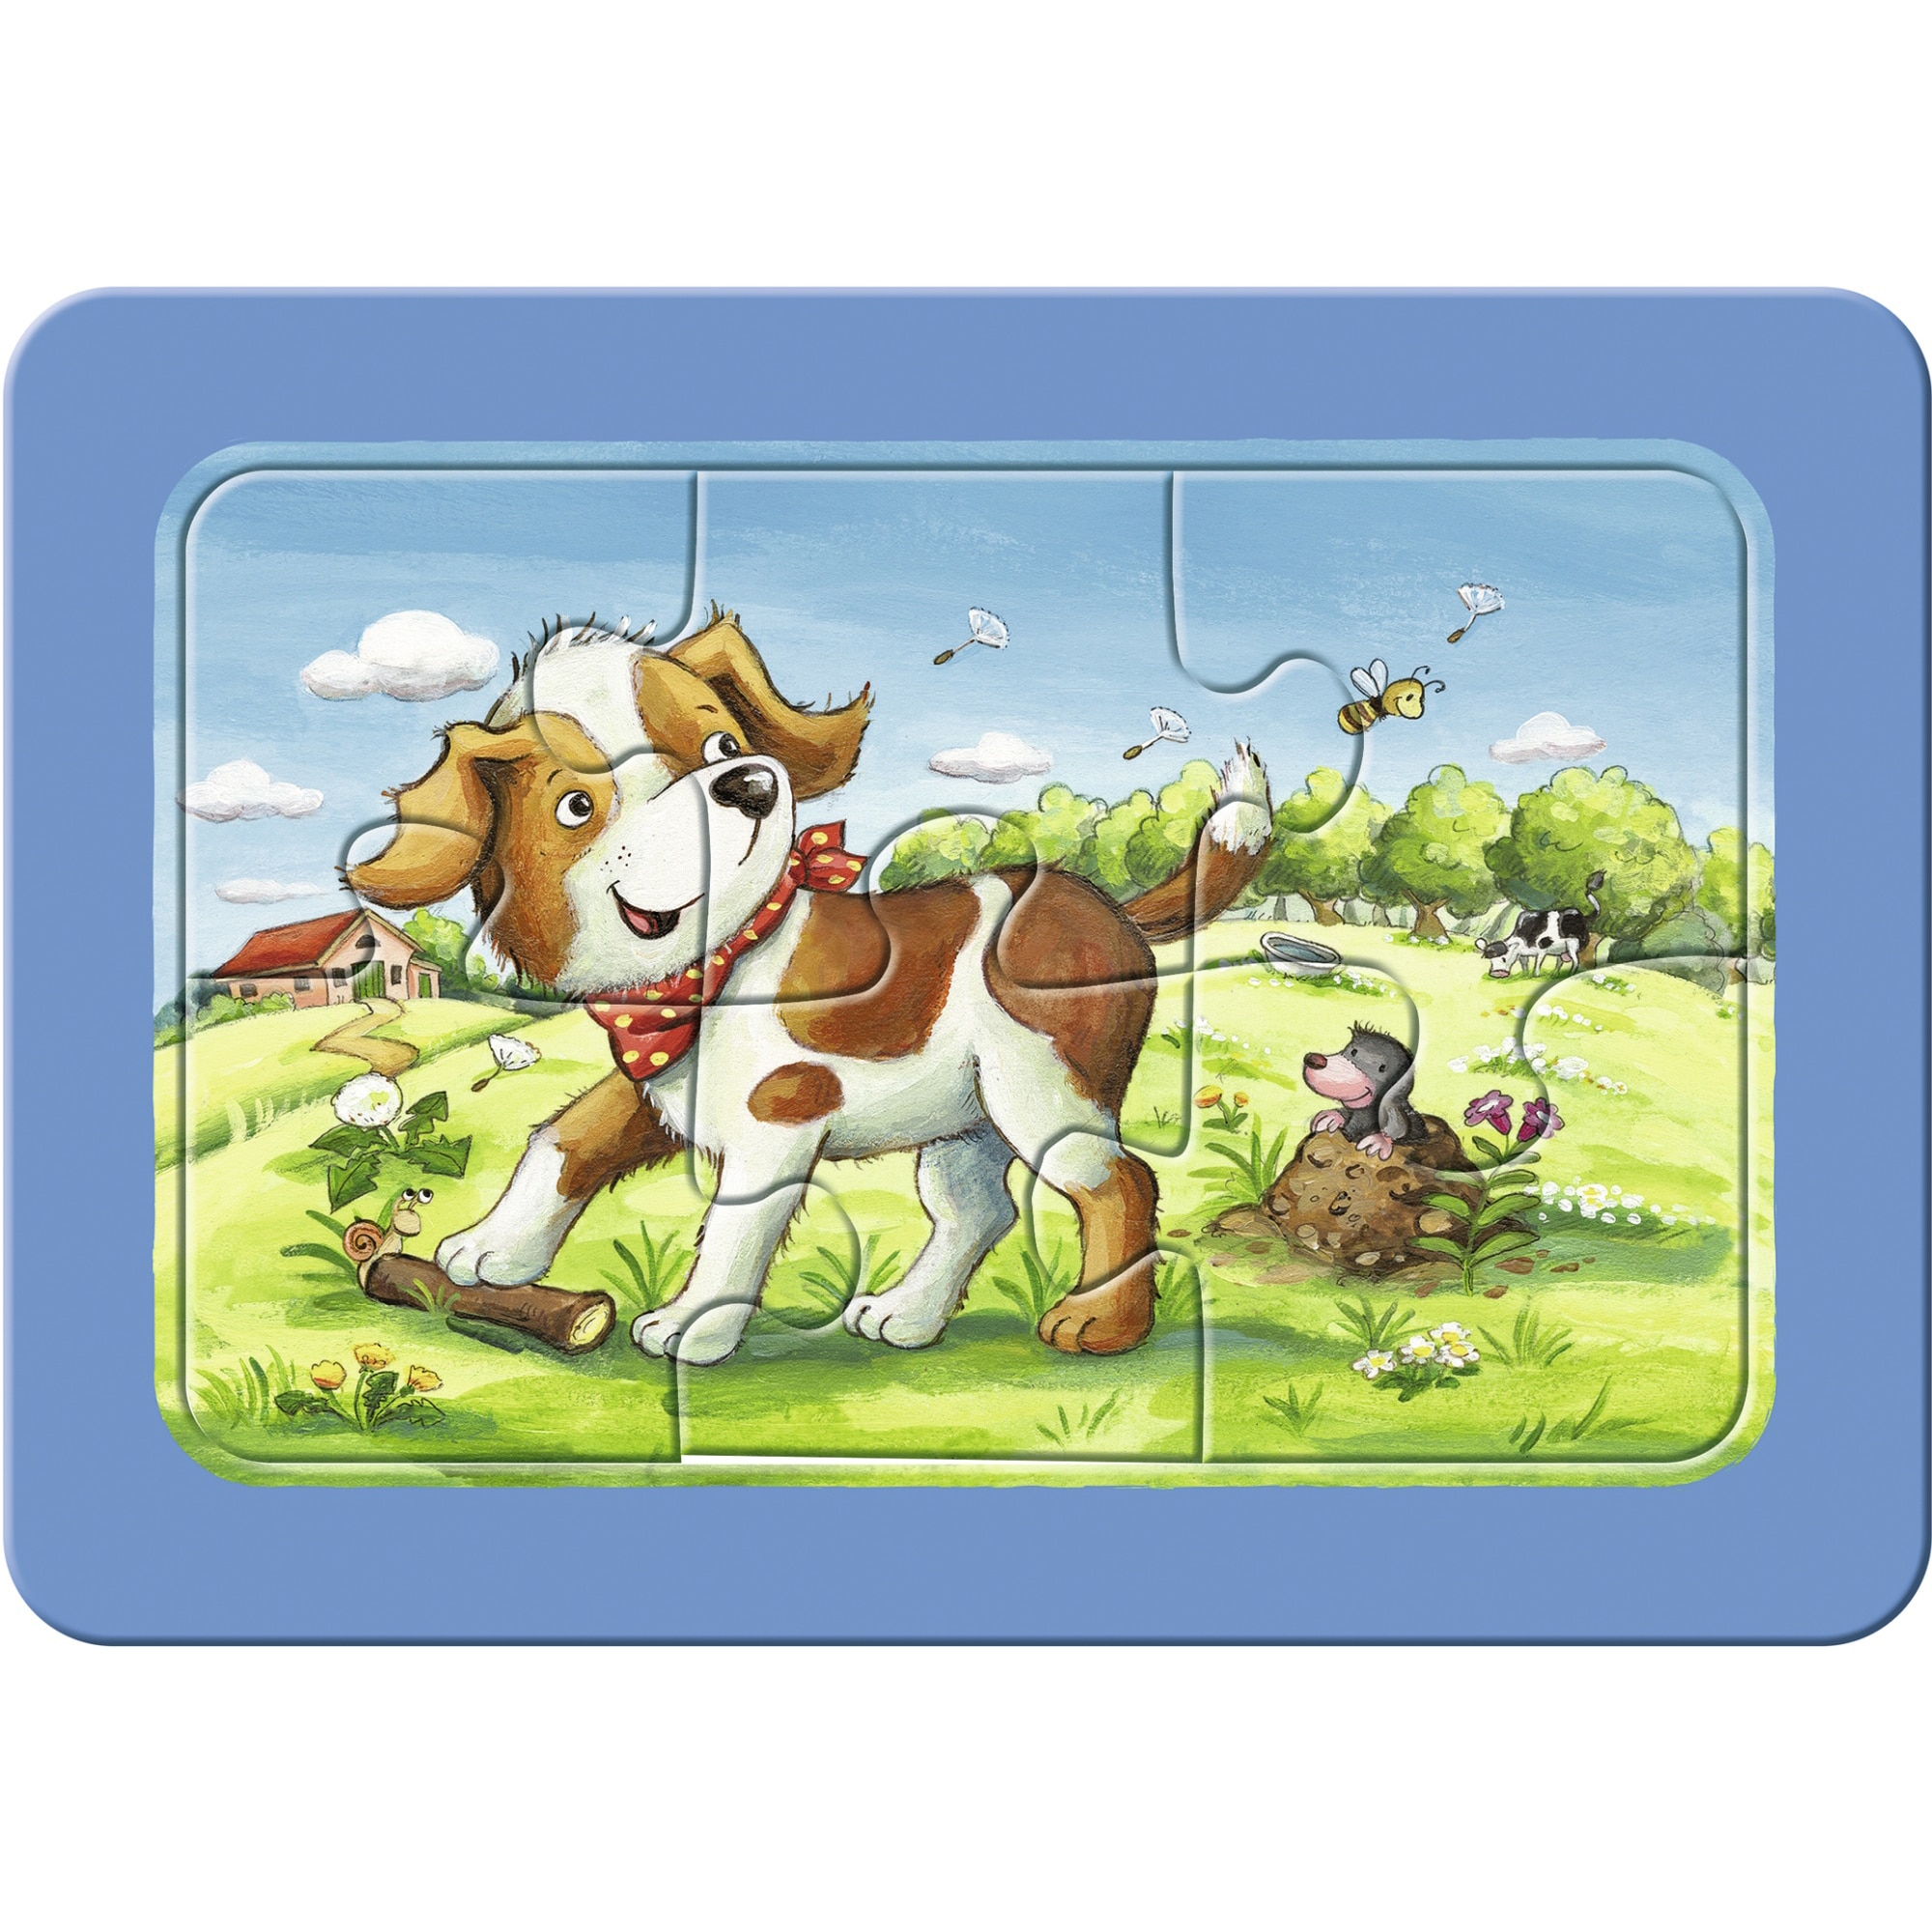 Puzzle 3x6 piese - Animalute | Ravensburger